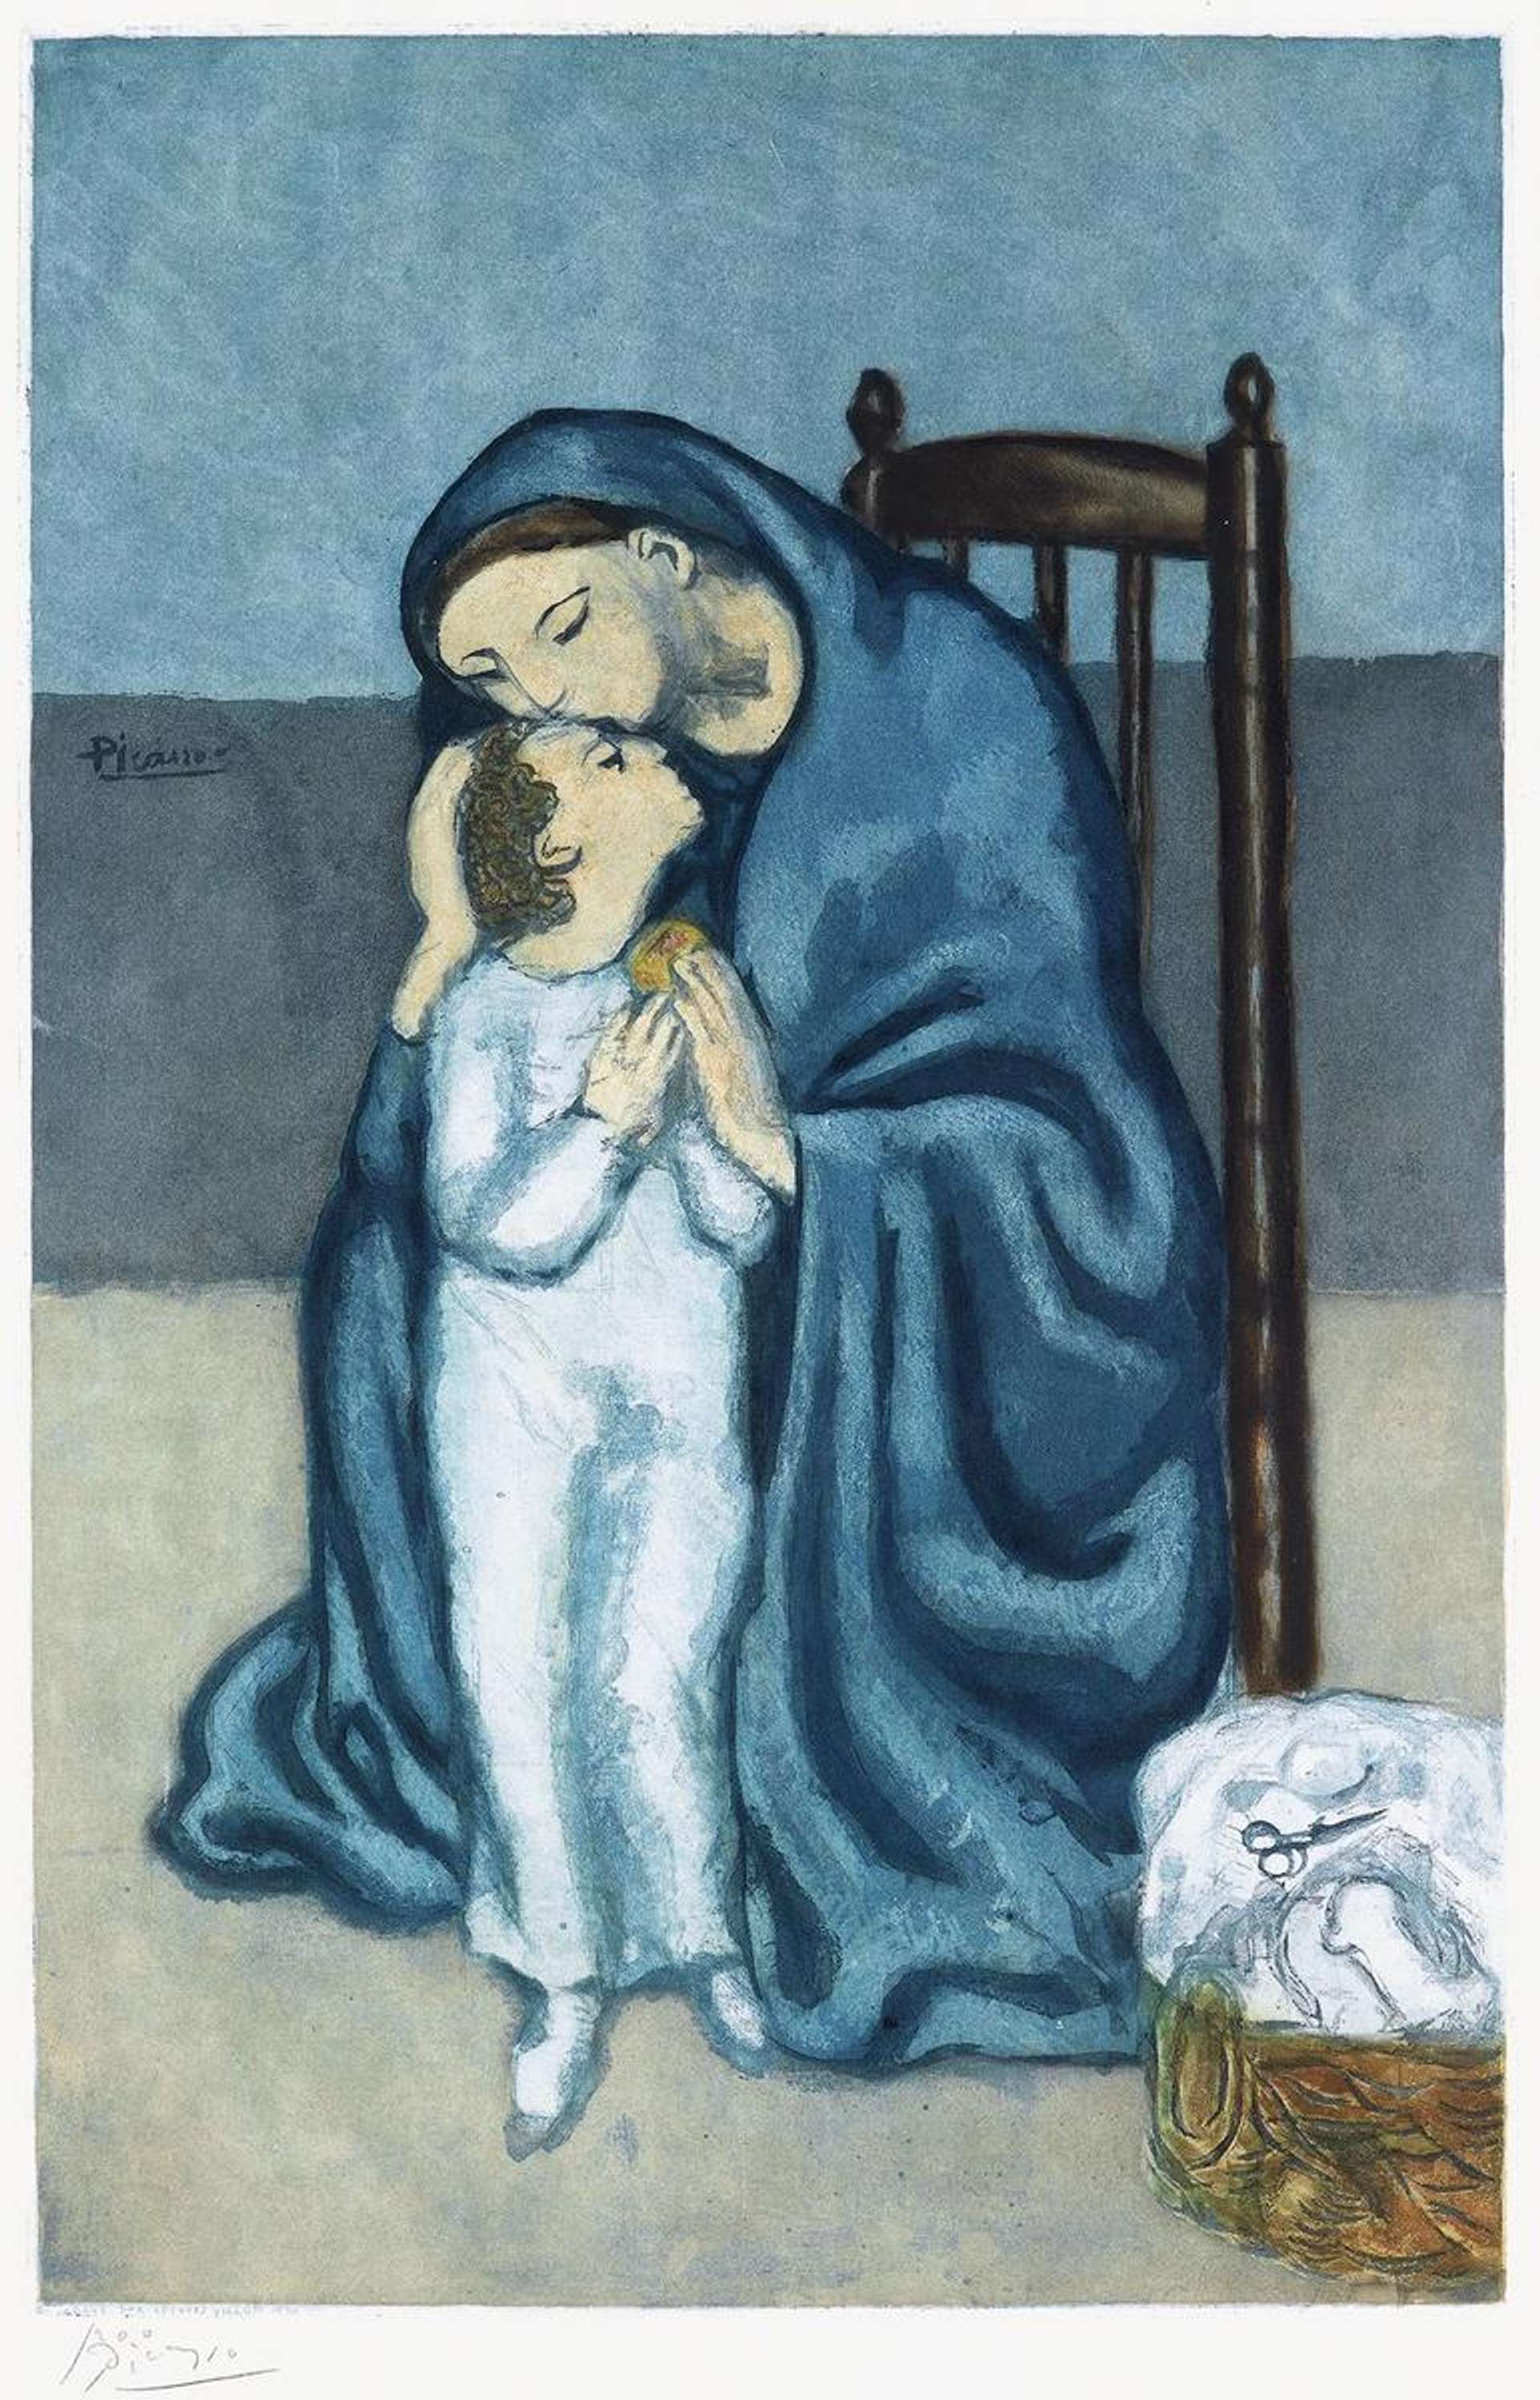 Pablo Picasso’s Maternité, an Impressionist style painting of a woman dressed in blue tilting her head to the right to kiss the child below her. To her left there is a basket with sewing material.